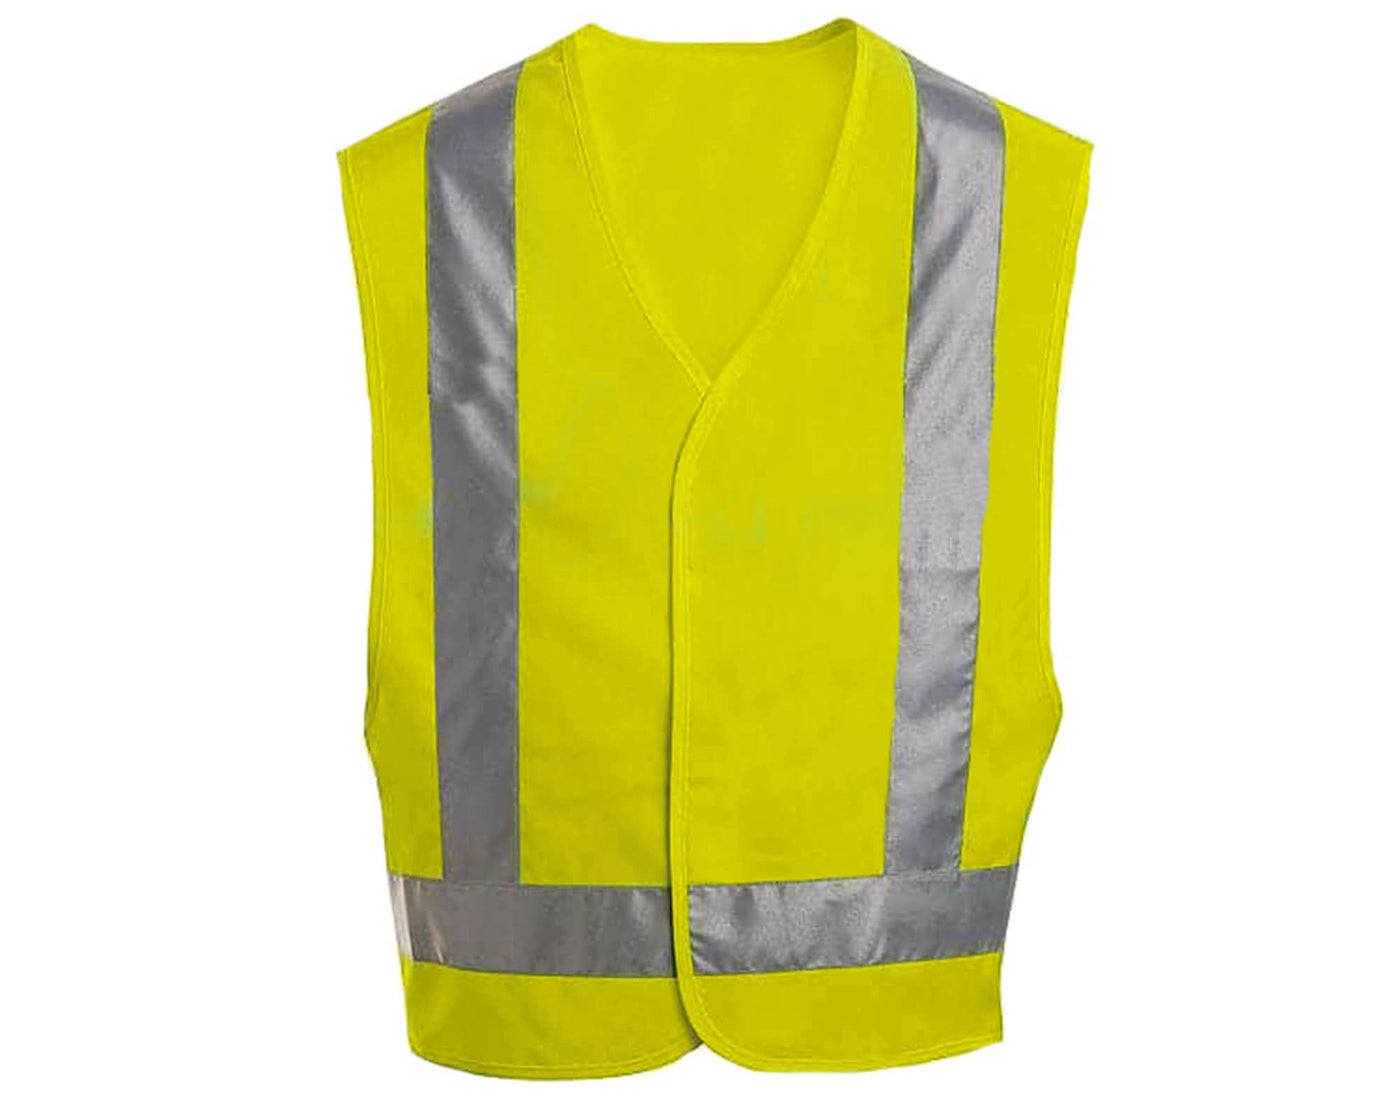 front view of flourescent safety vest with reflective stripe